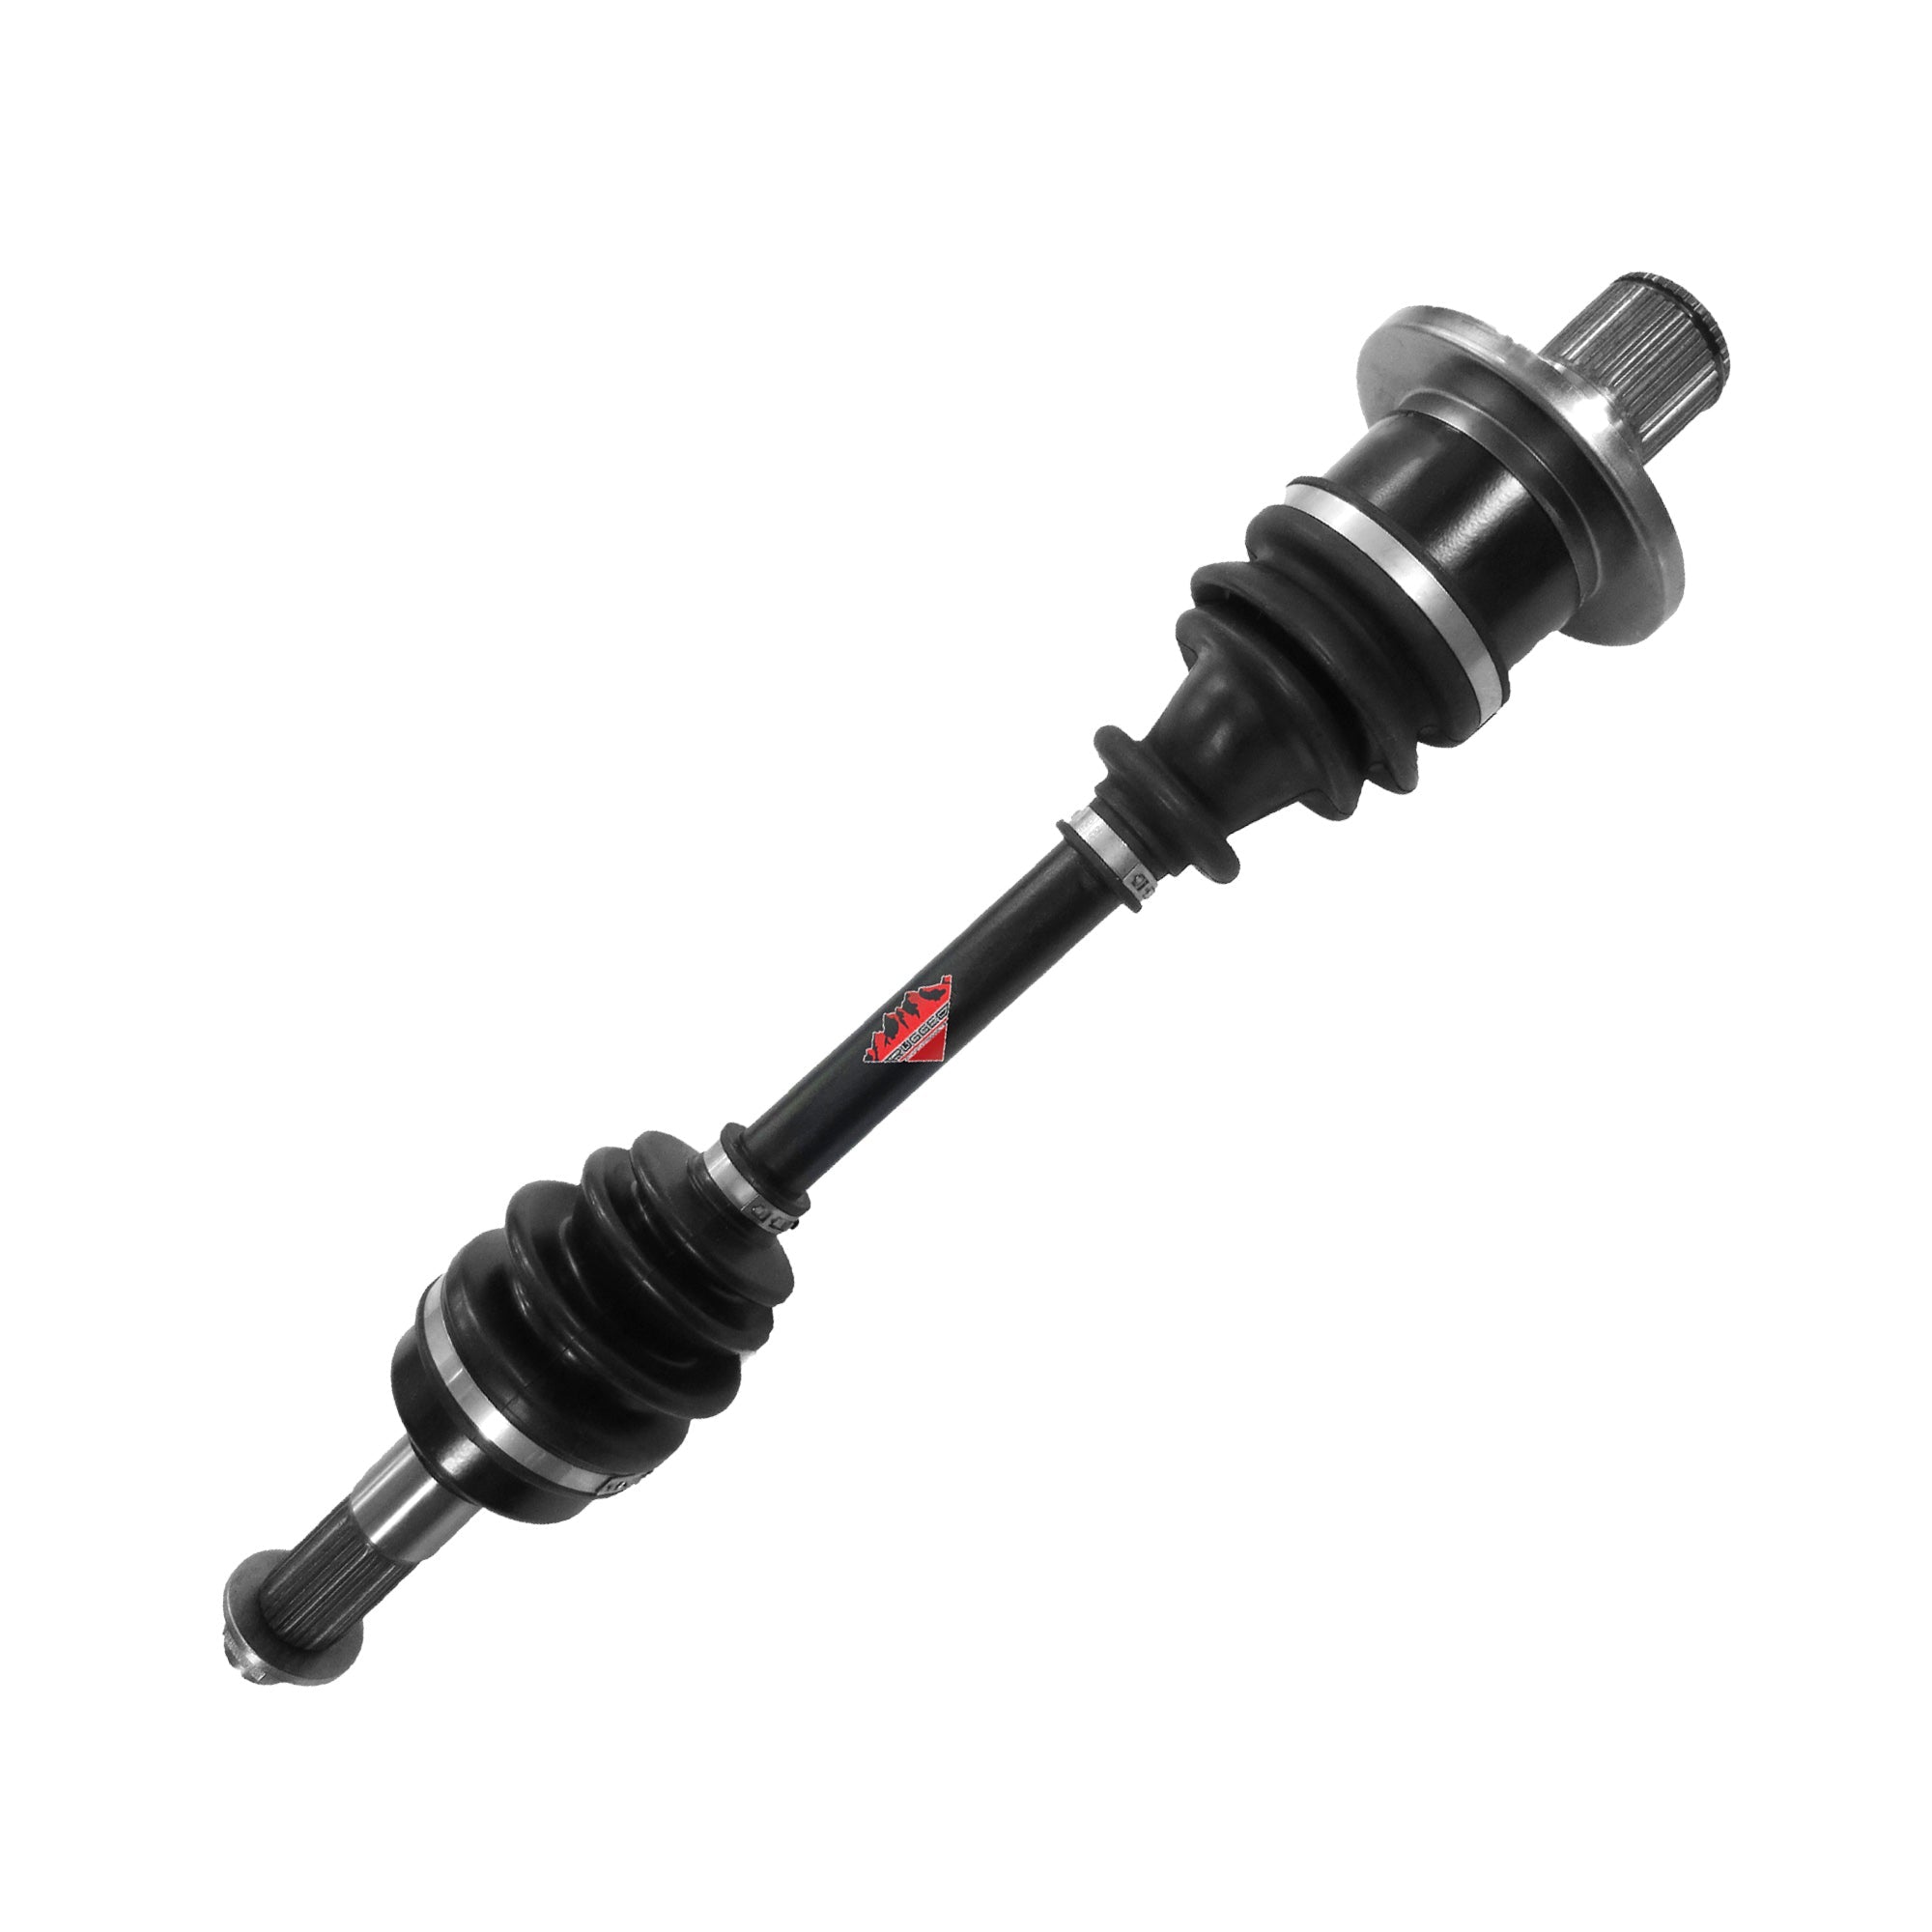 Performance Axle for Yamaha Grizzly 660 